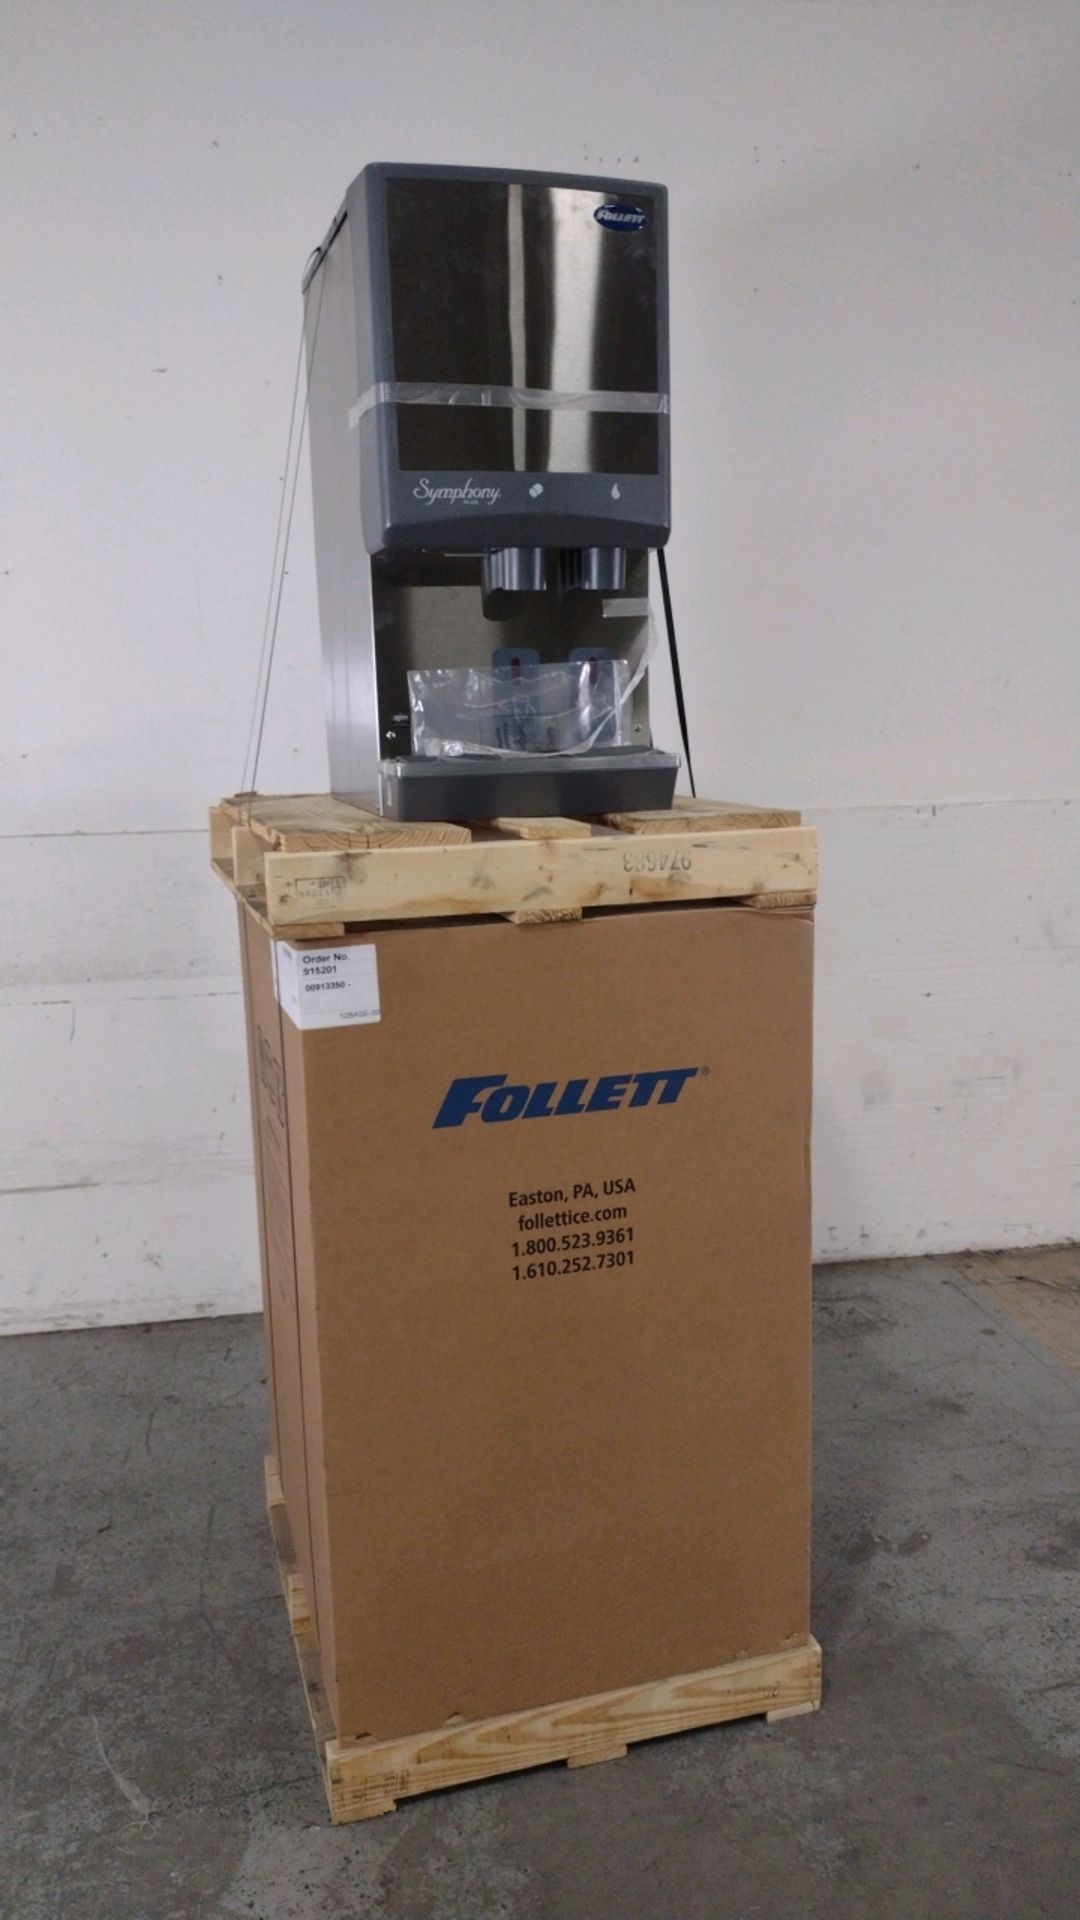 FOLLETT 12CI425A/12BASE-00 CHEWBLET ICE MAKER WITH STAND (IN BOX) LOCATED AT 1825 S. 43RD AVE SUITE